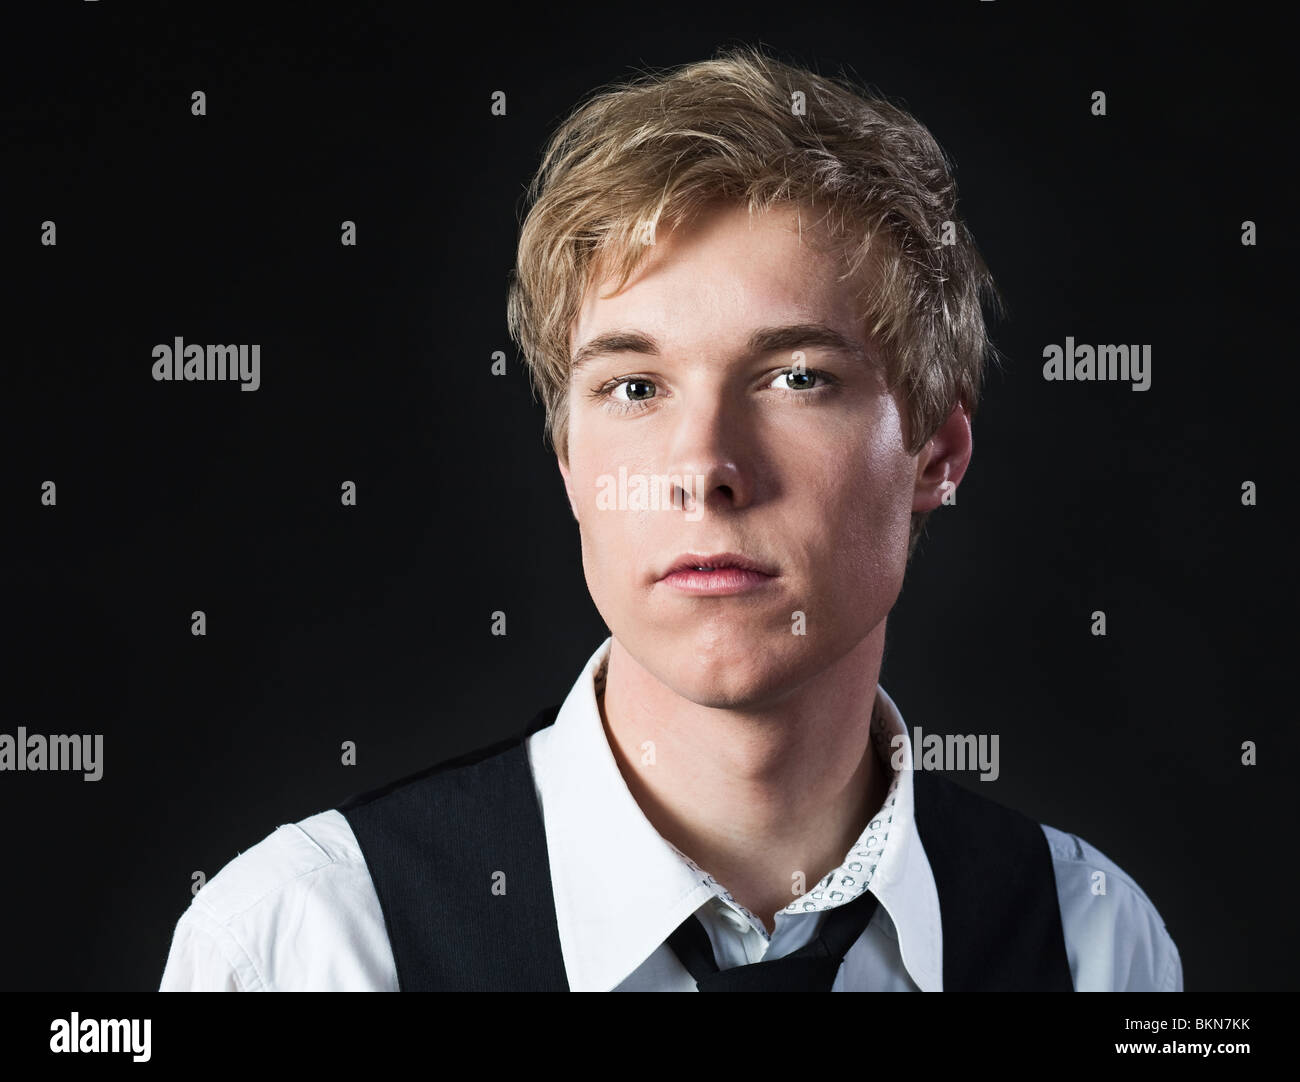 Portrait of serious young blond man in white shirt and waistcoat photographed against black background Stock Photo